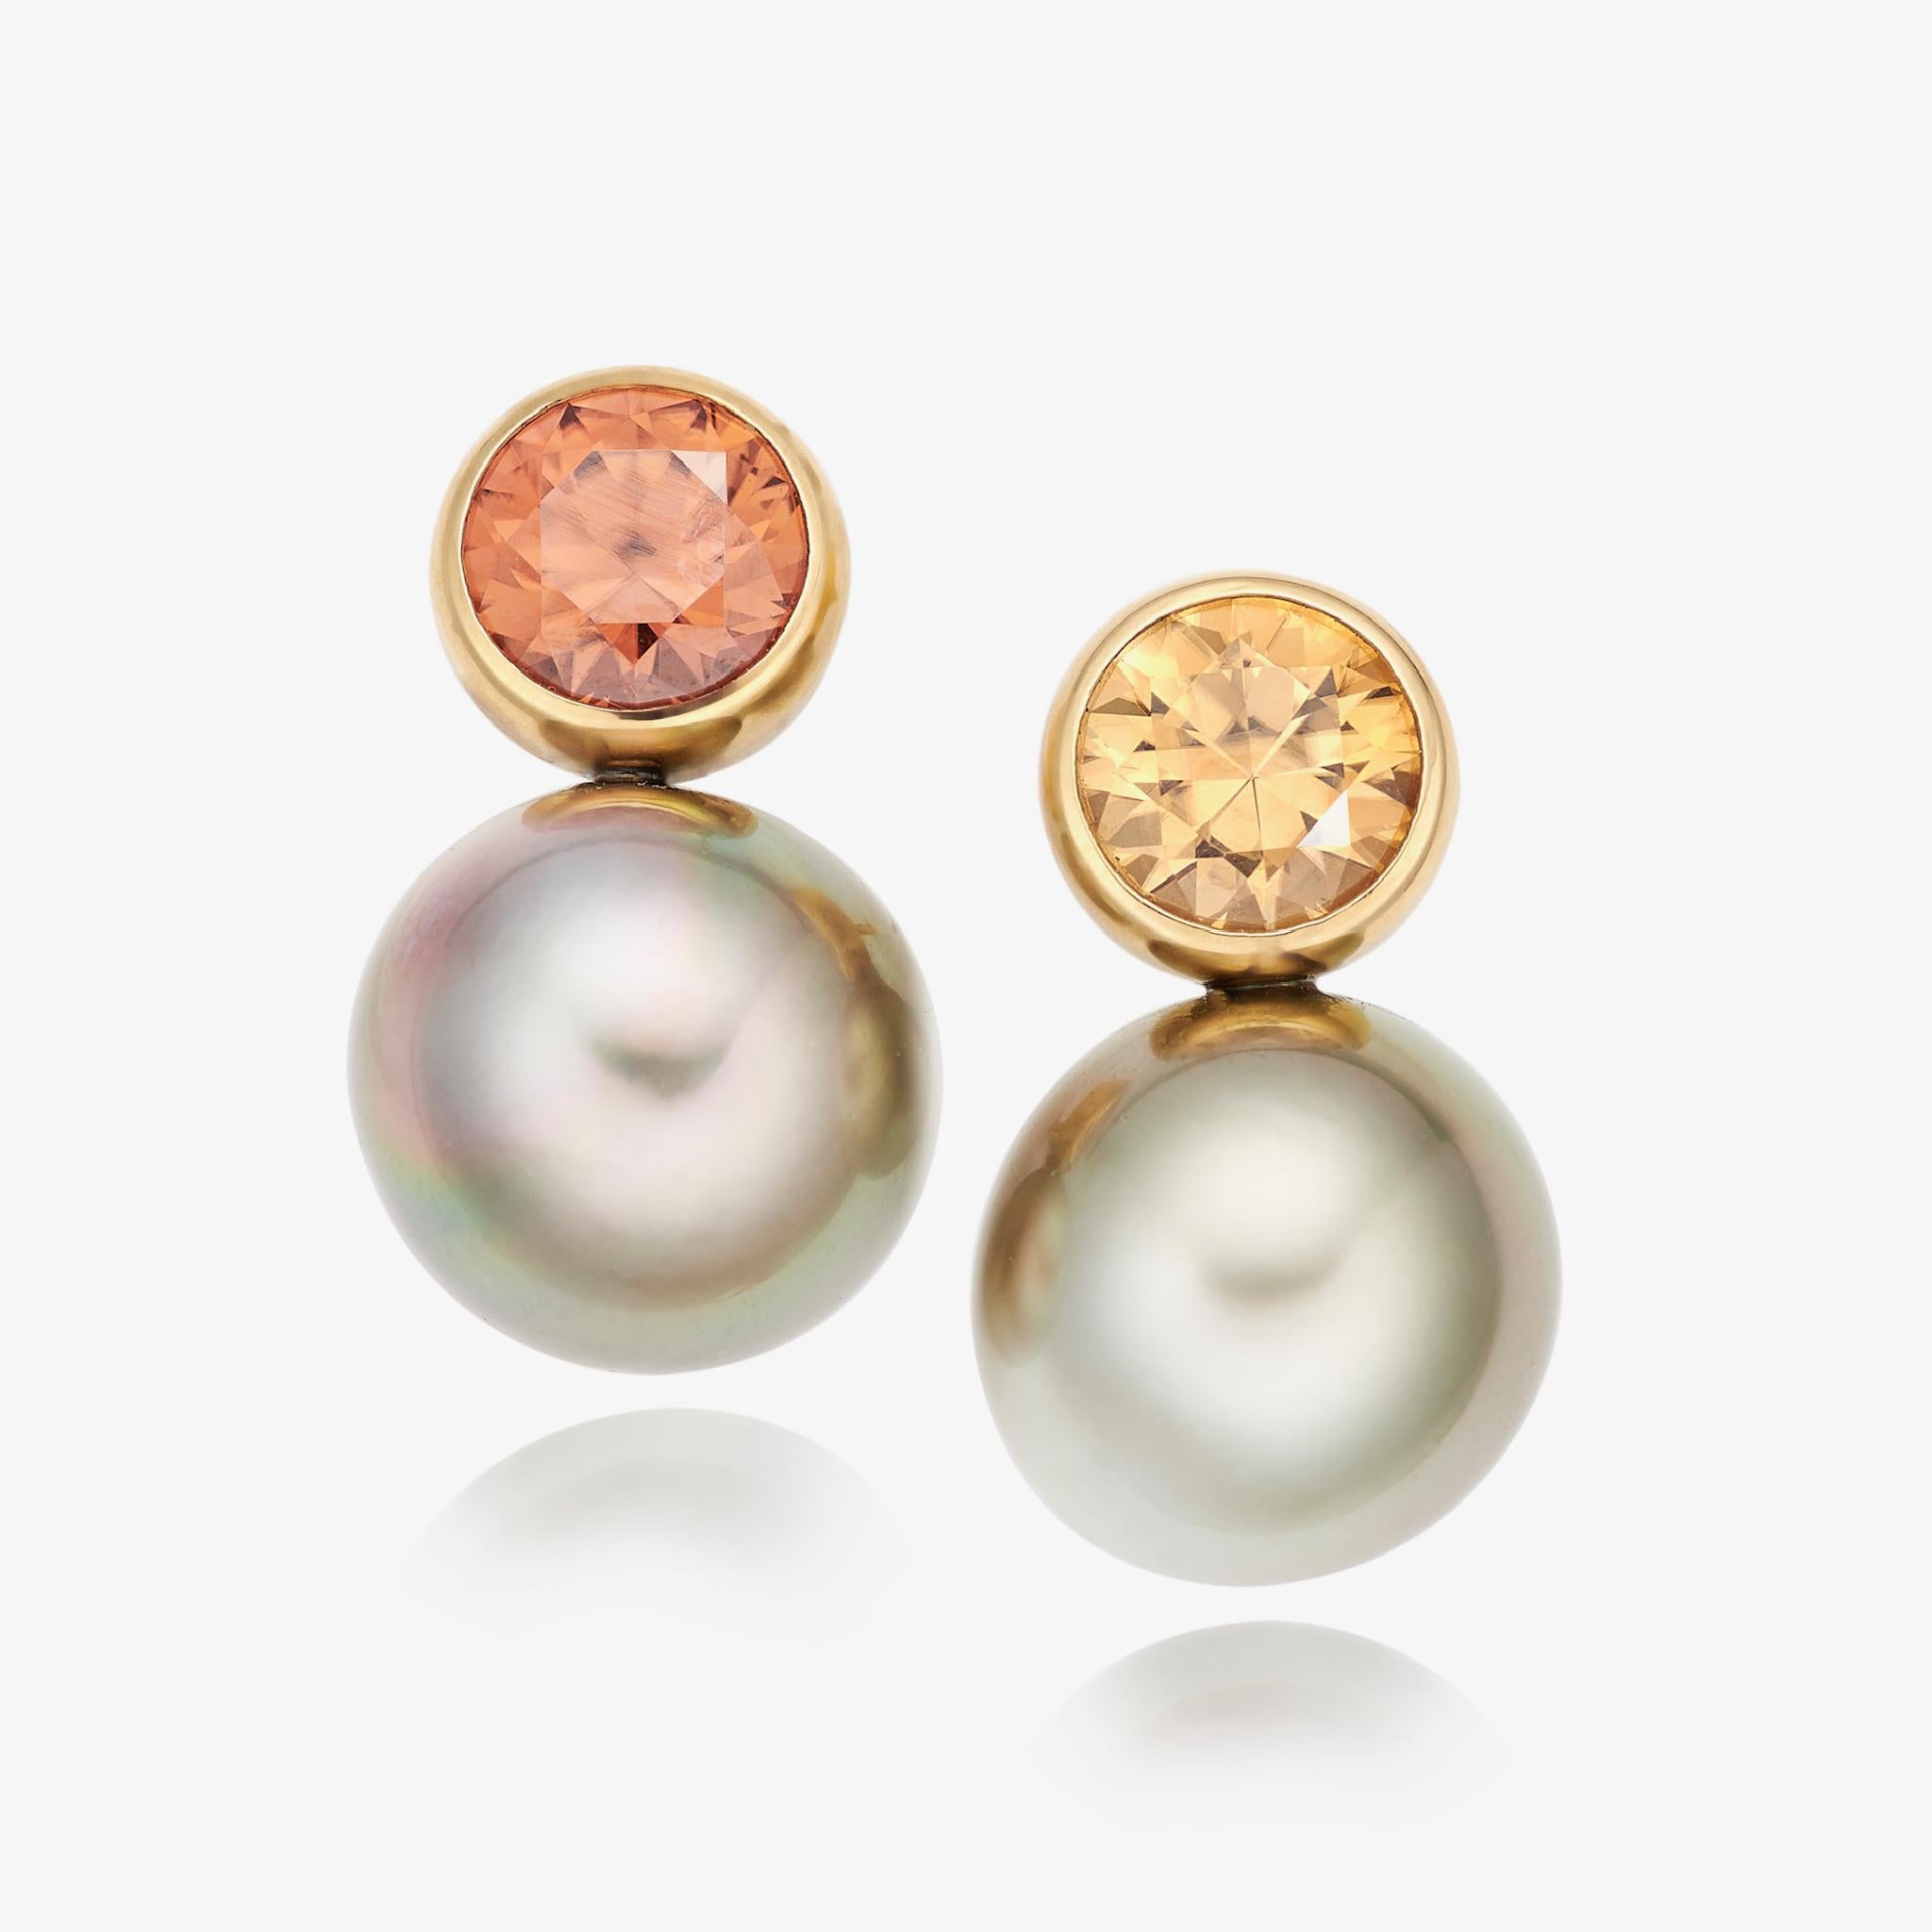 A pair of statement pearl earrings from Lilly Hastedt's
